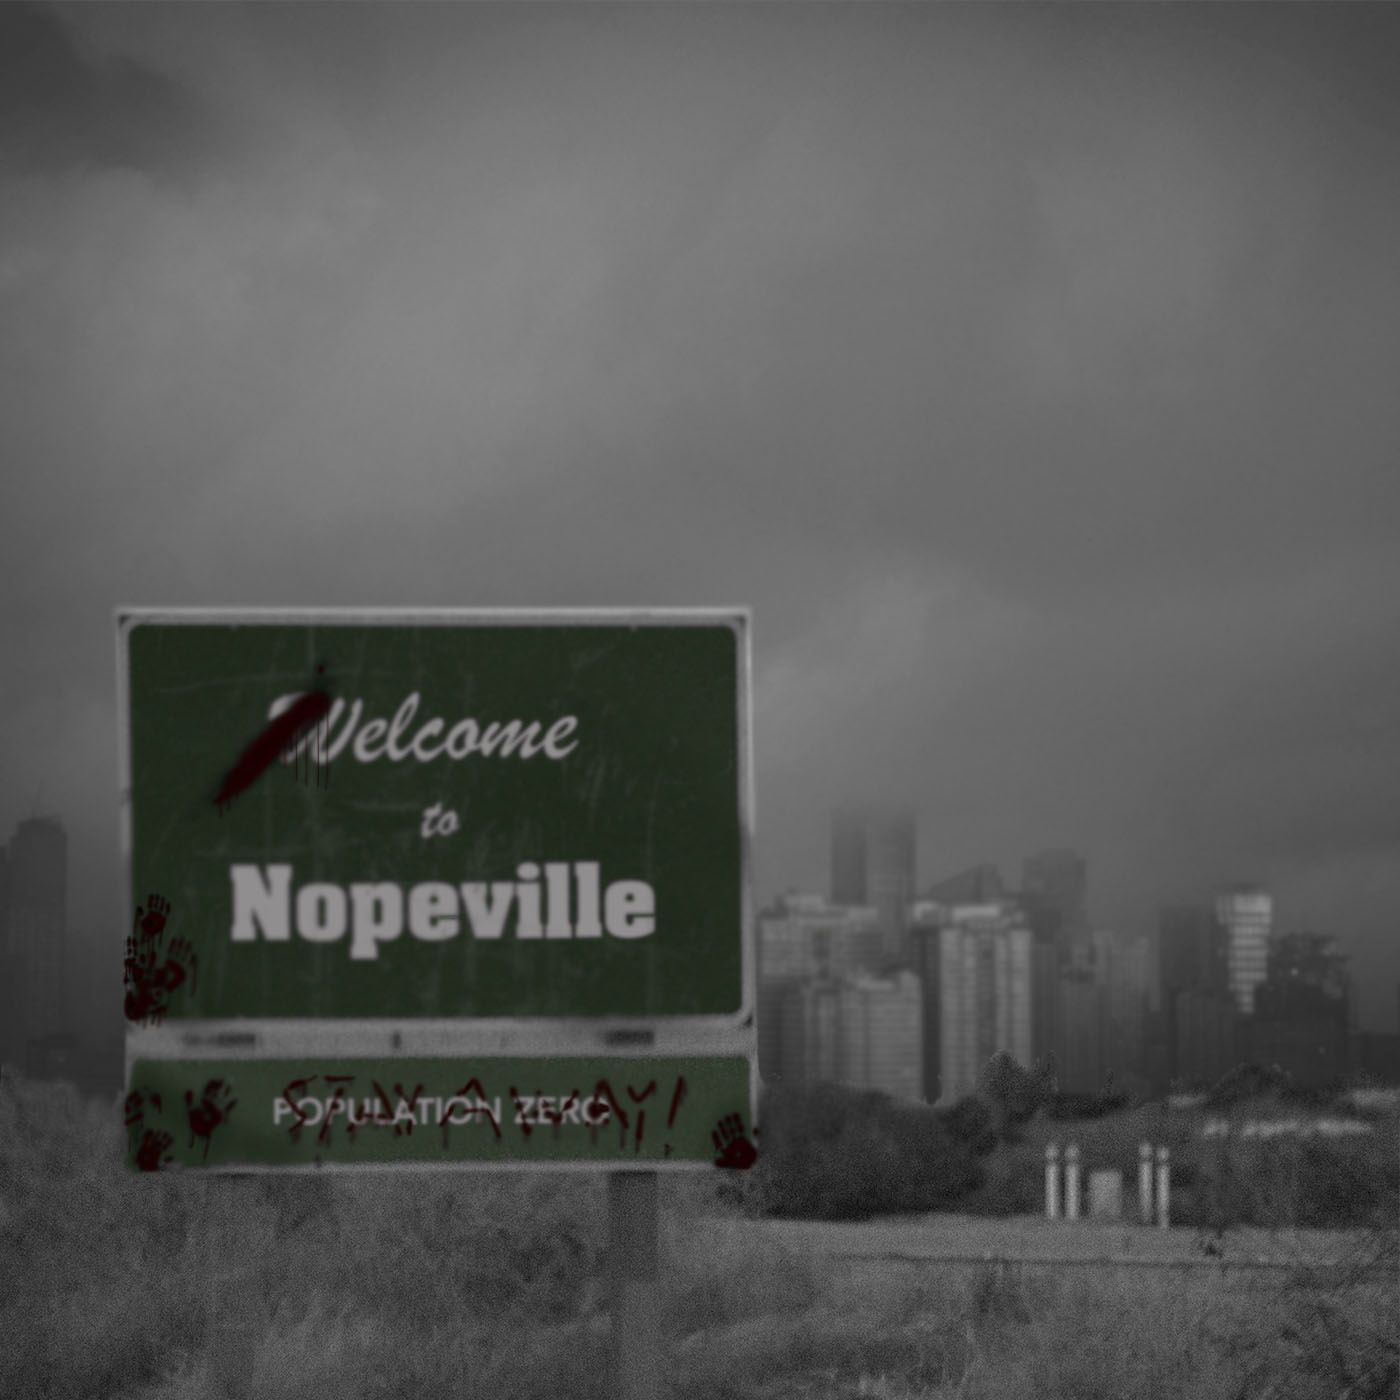 Tour of Insanity by Nopeville